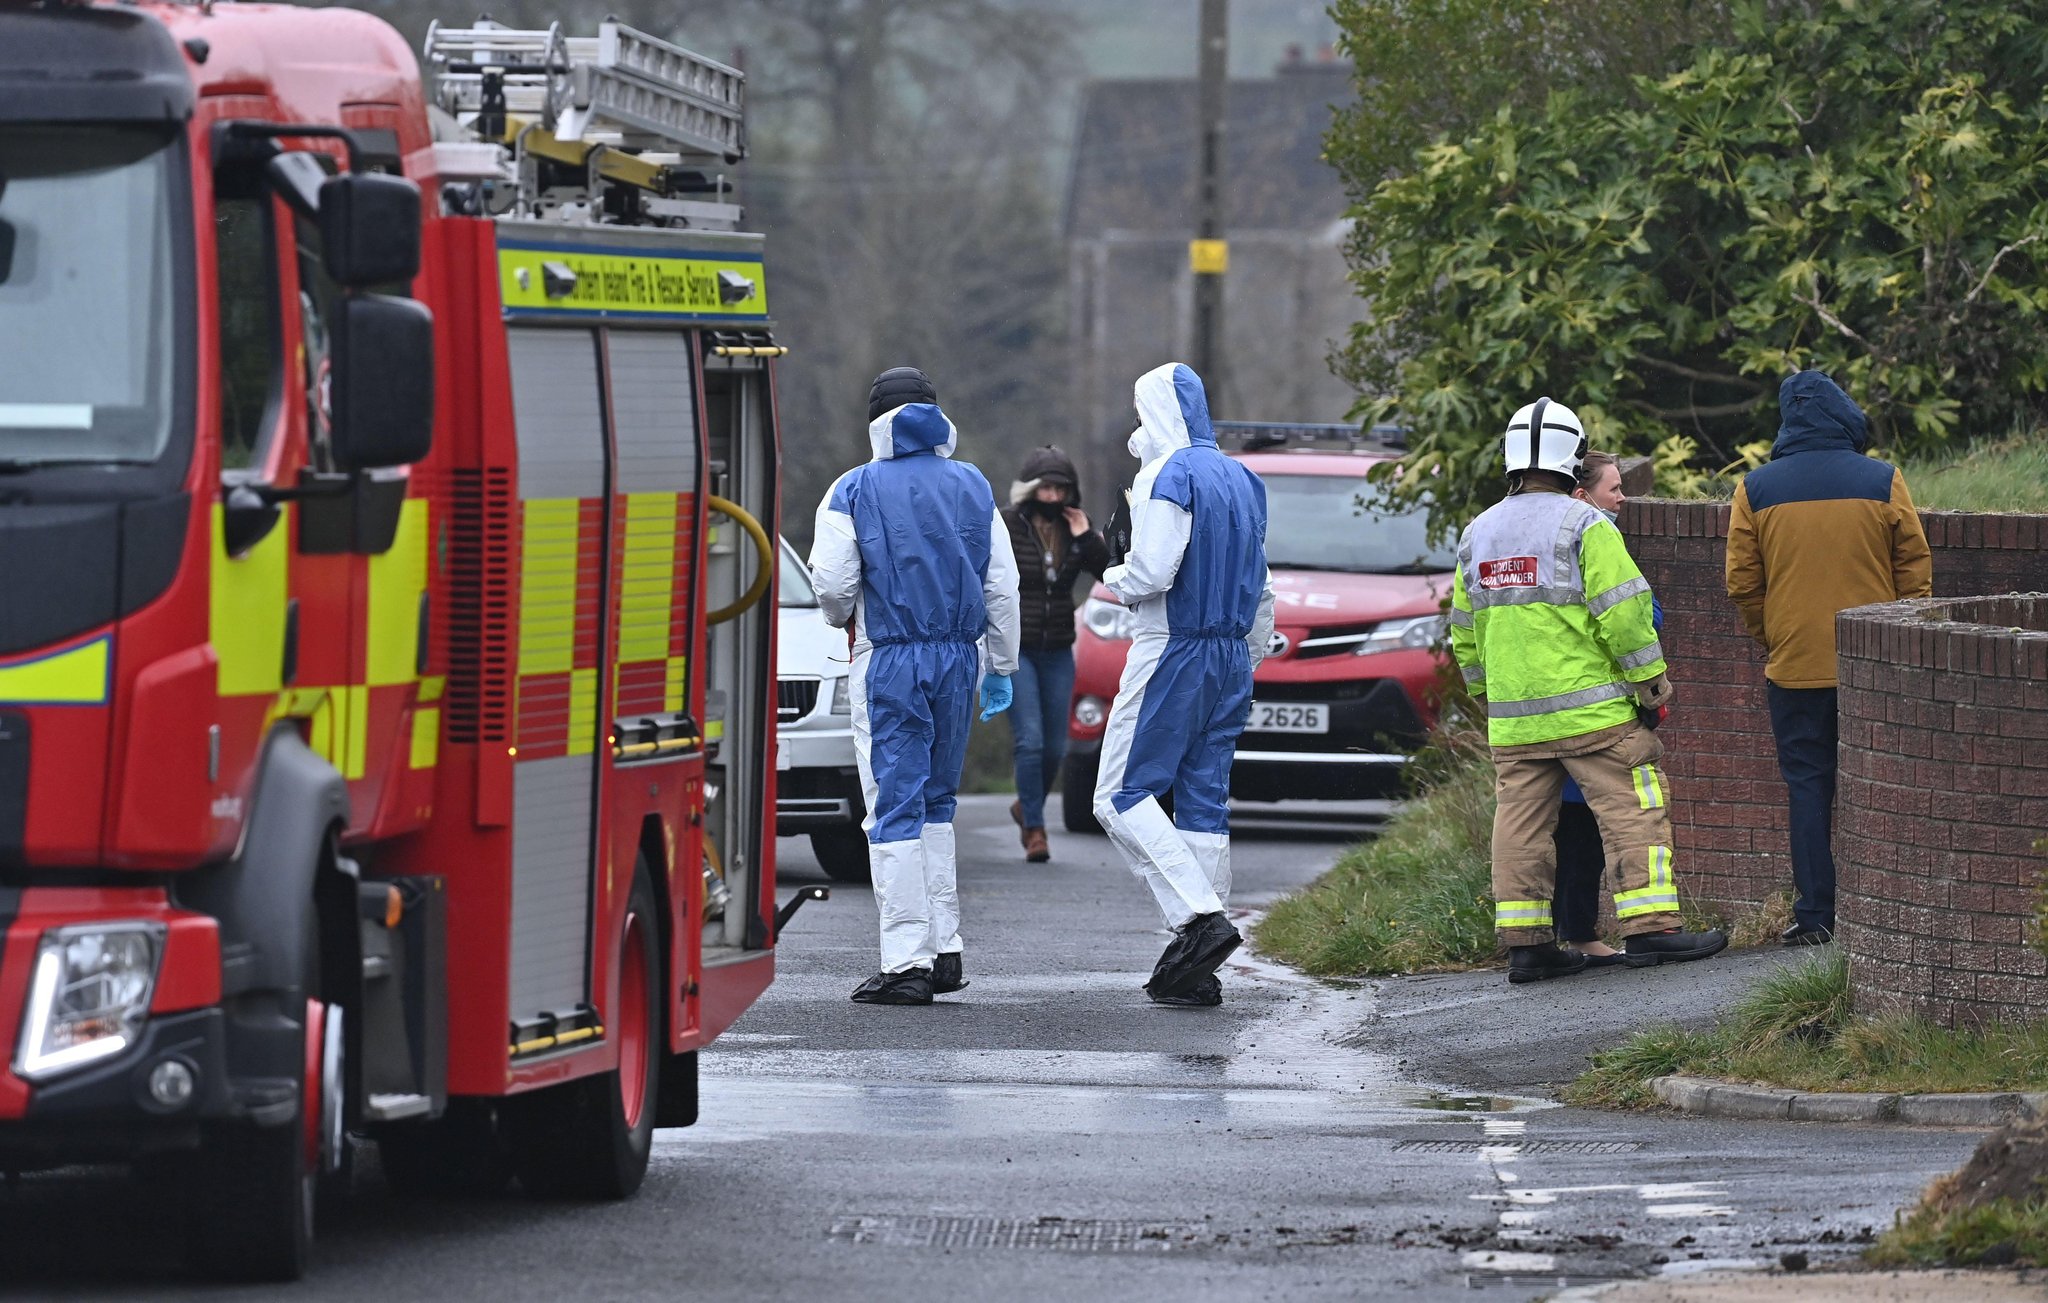 Police appeal for information following death in fire at property